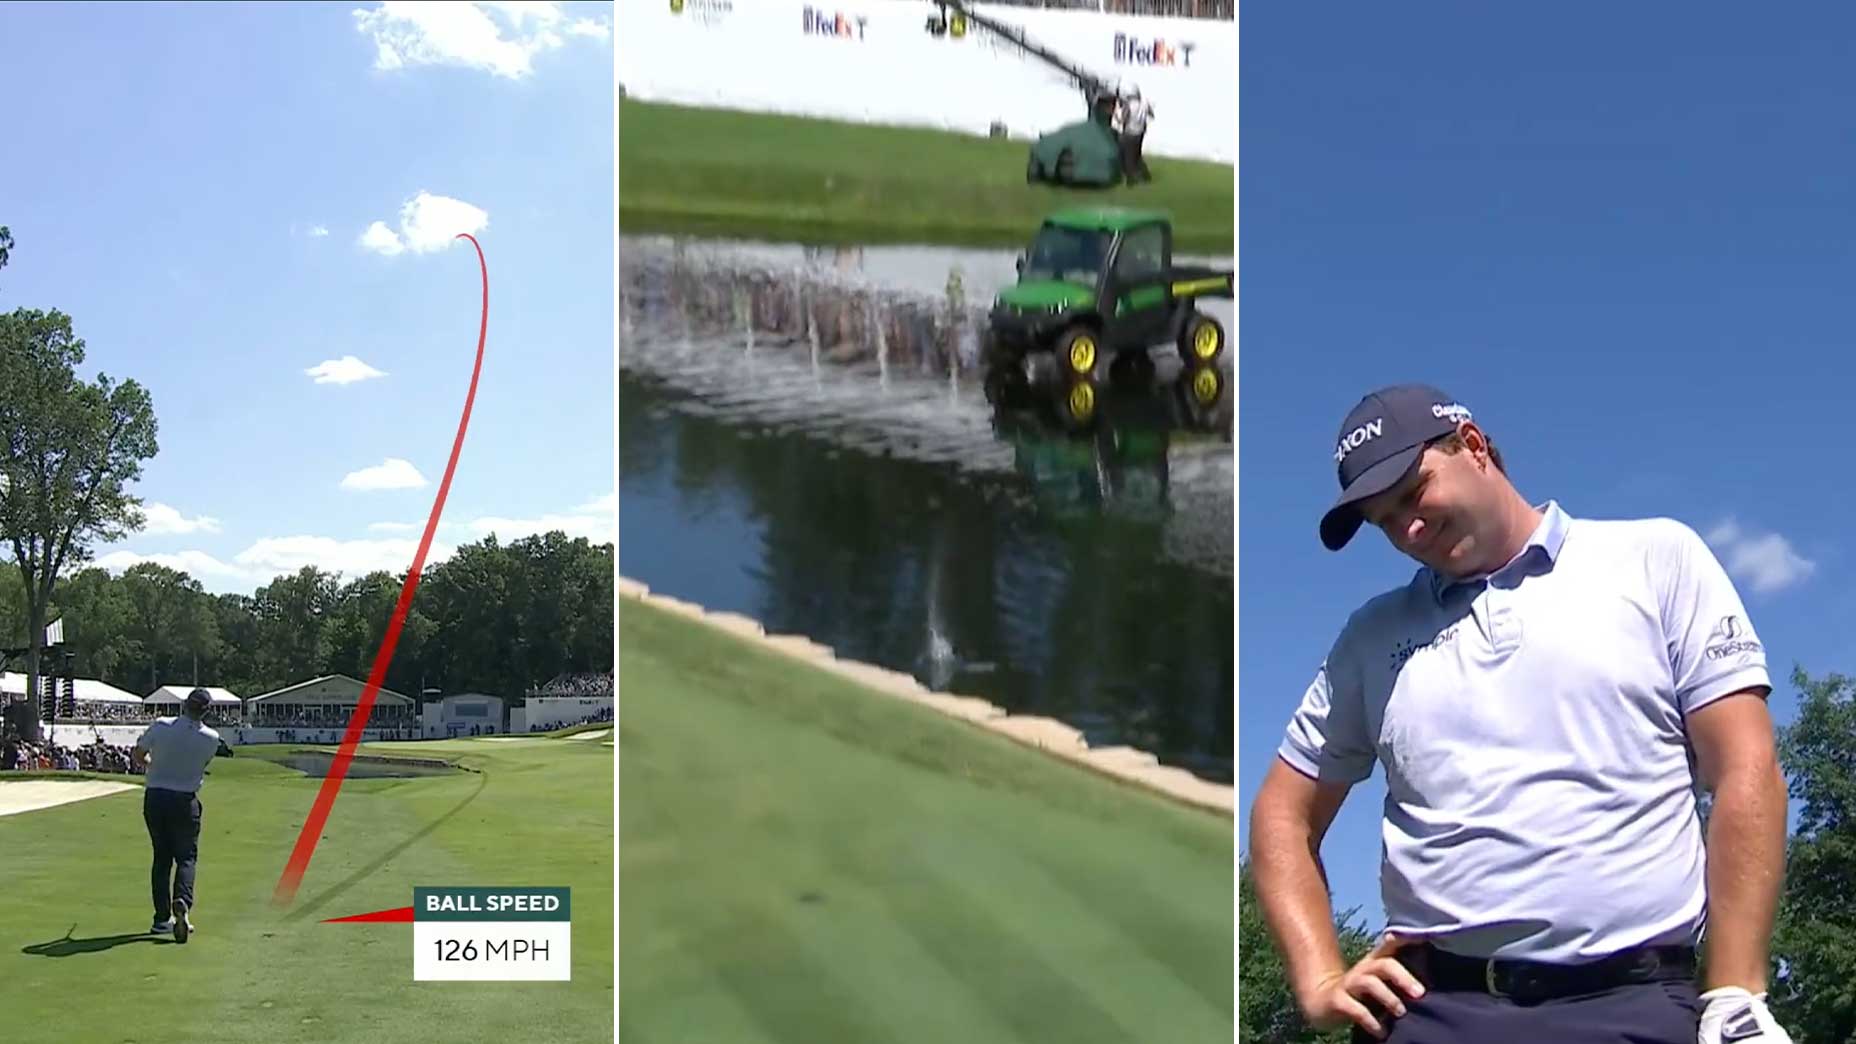 WATCH: Pro’s historic 59 bid ruined with disastrous 18th hole waterball